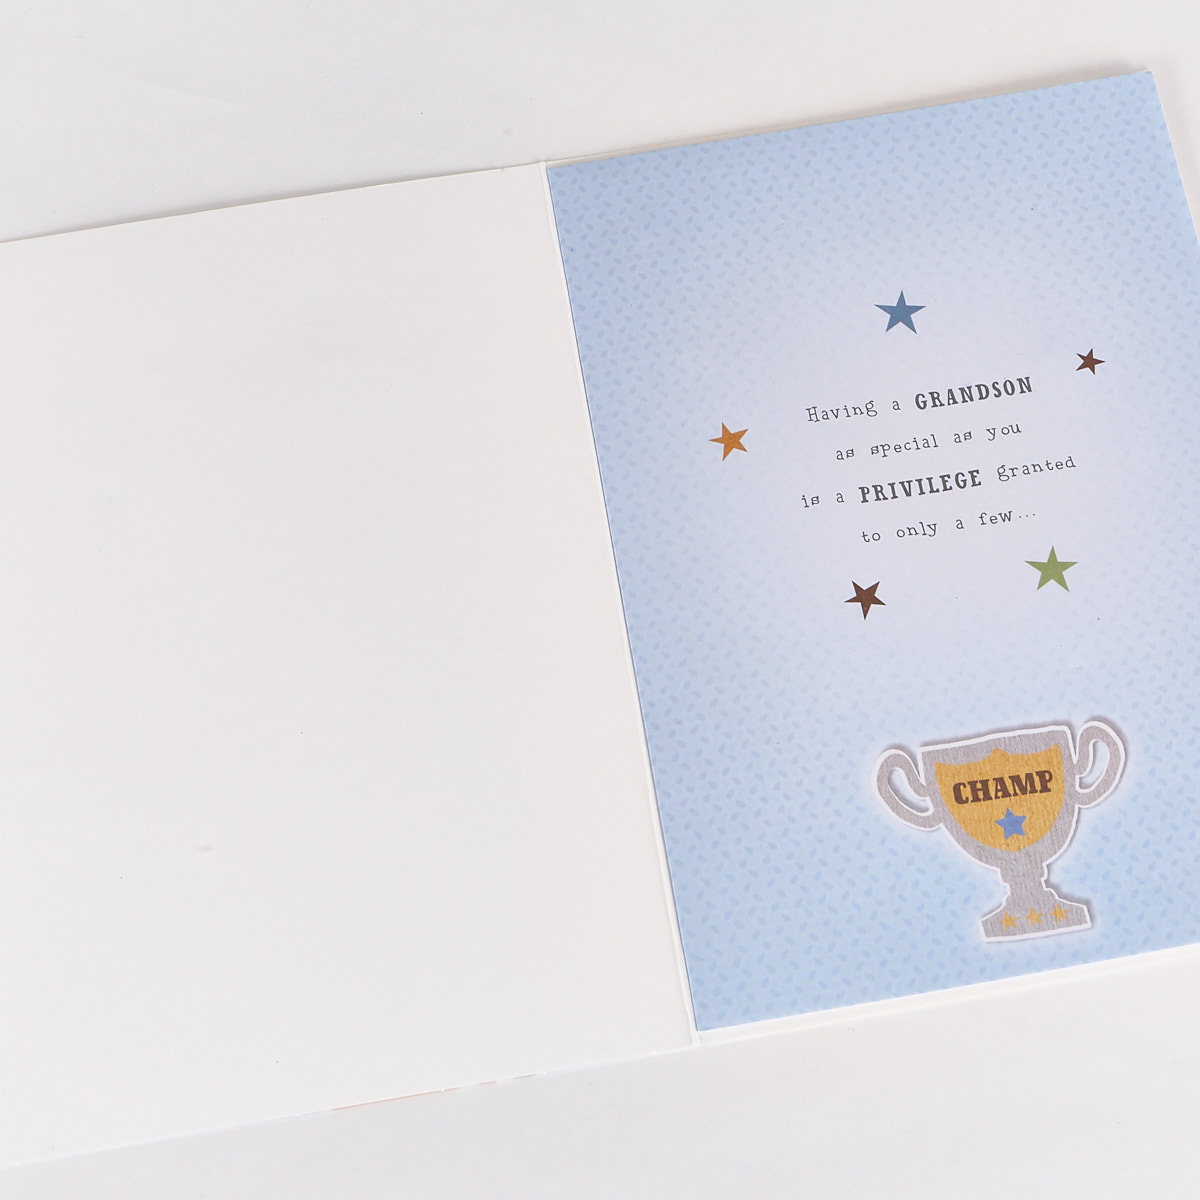 Signature Collection Birthday Card - Grandson Bear Trophy